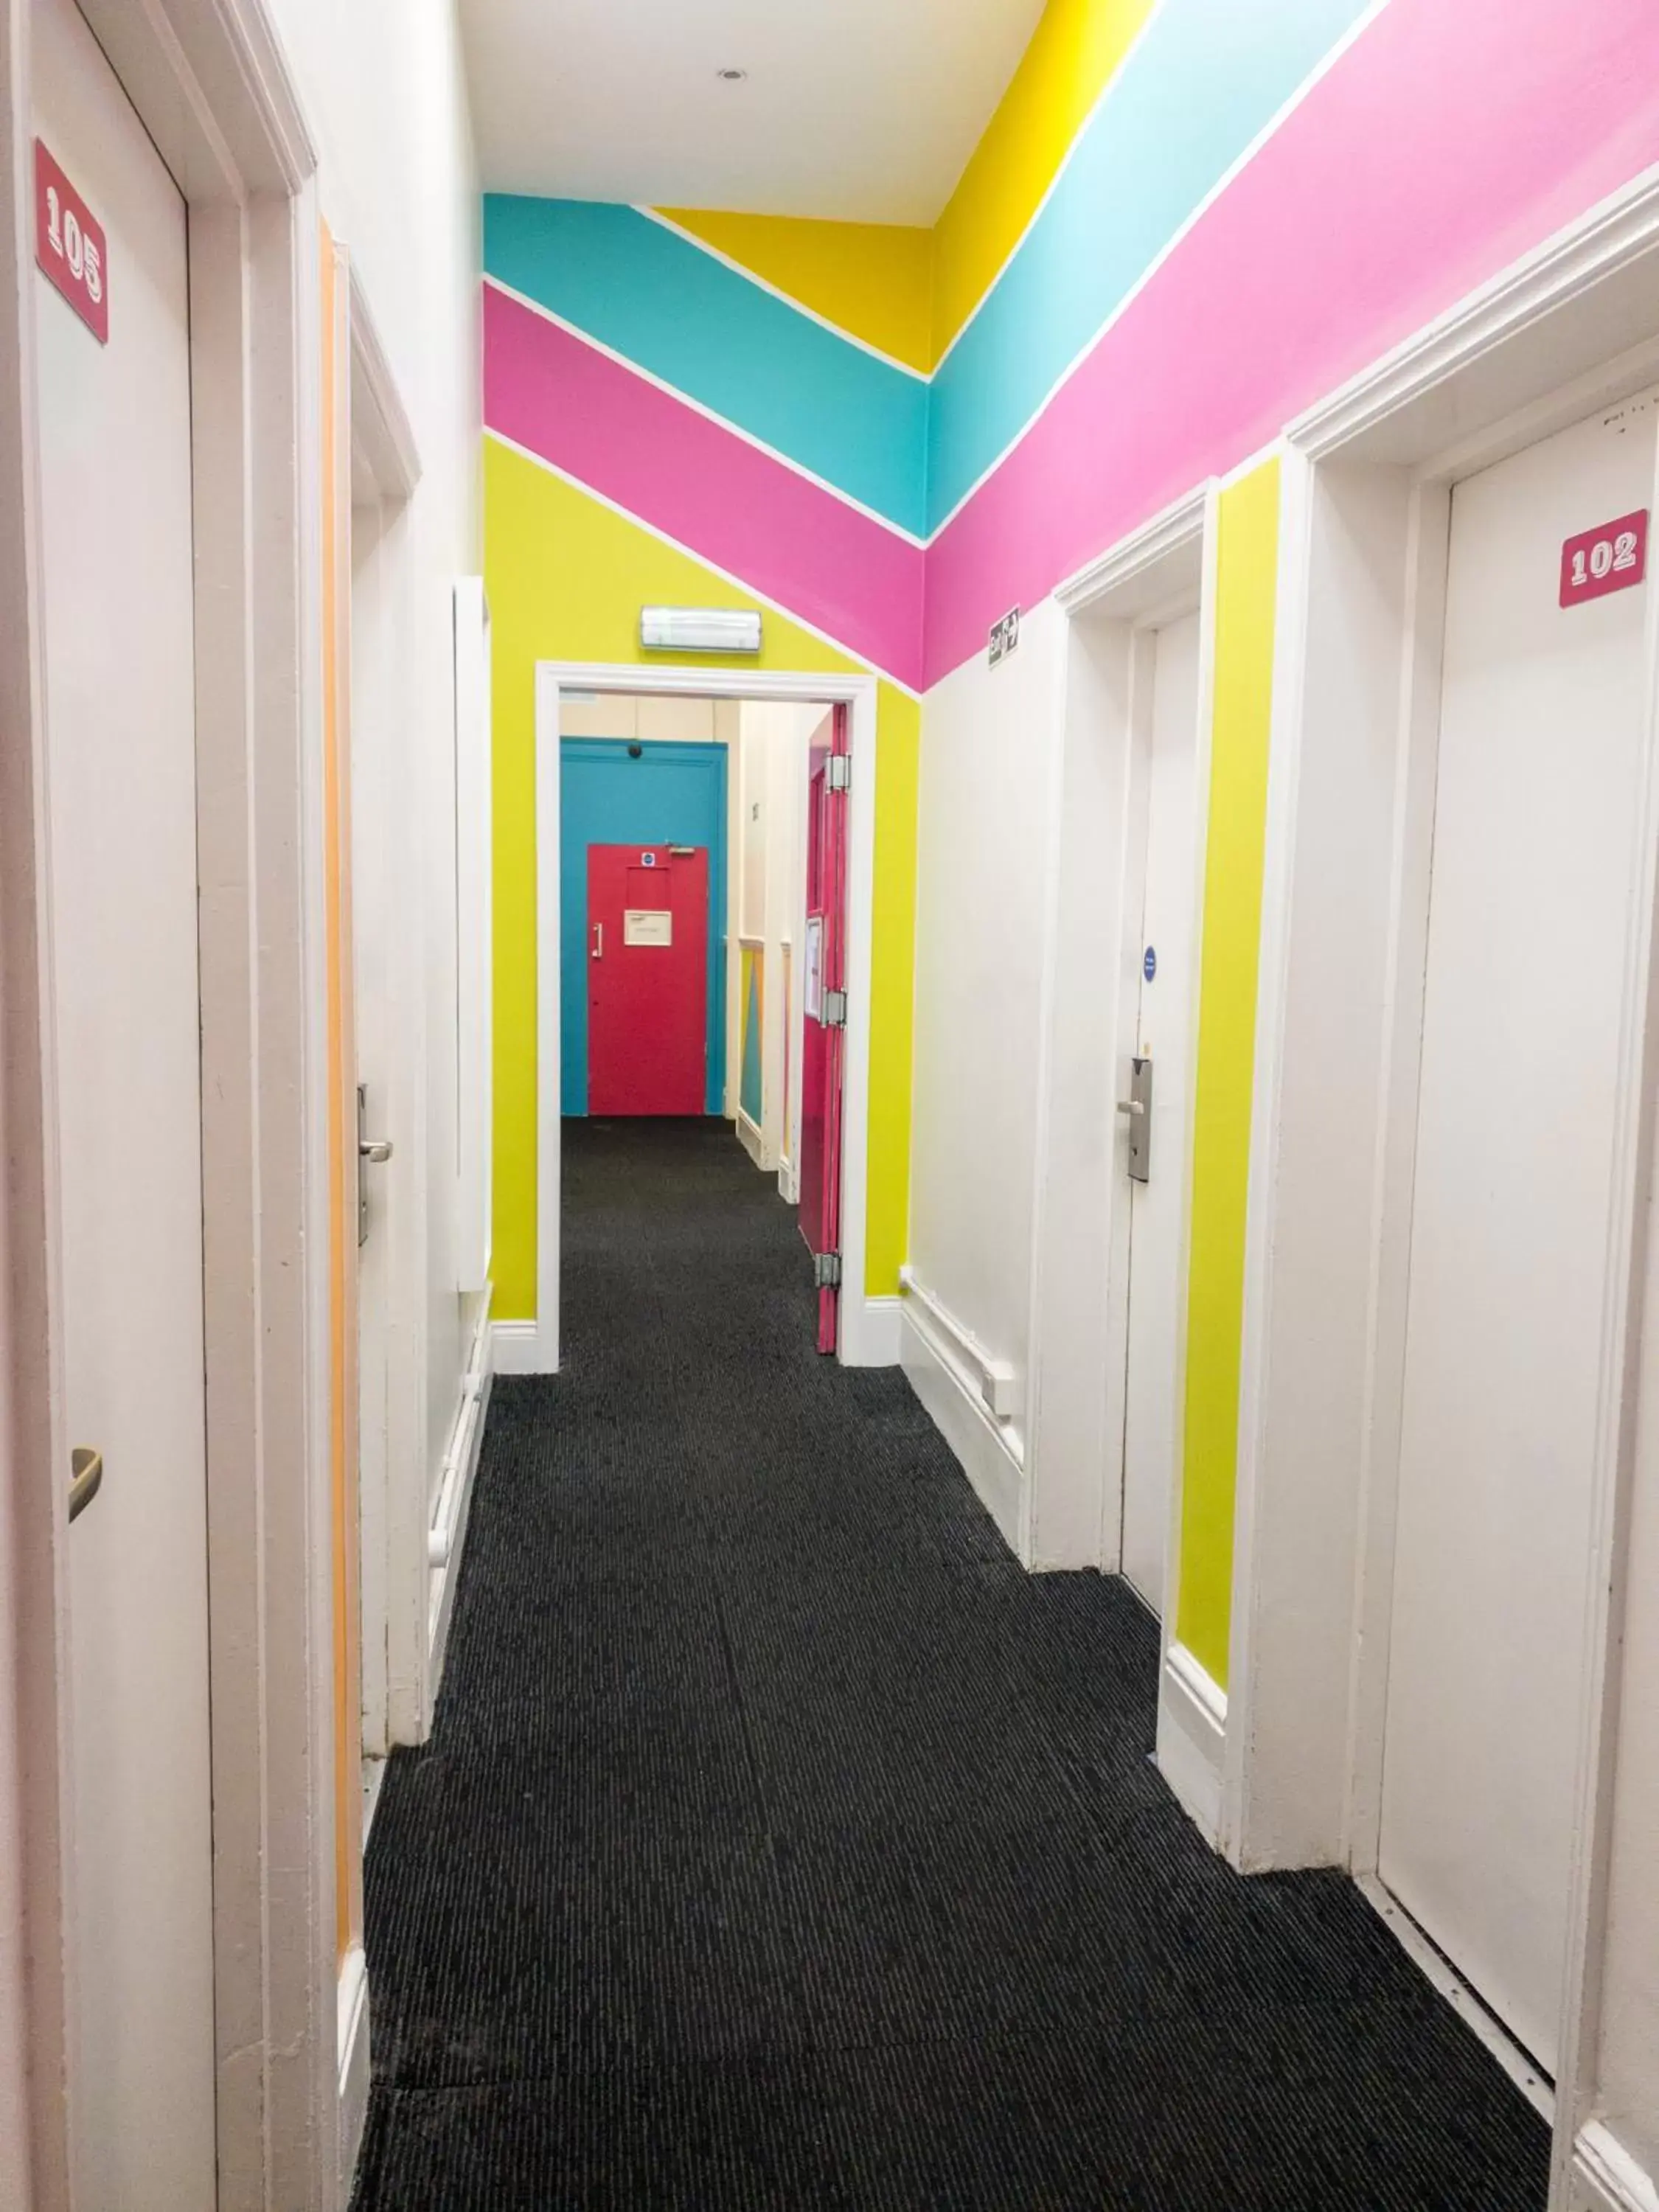 Property building in Smart Russell Square Hostel